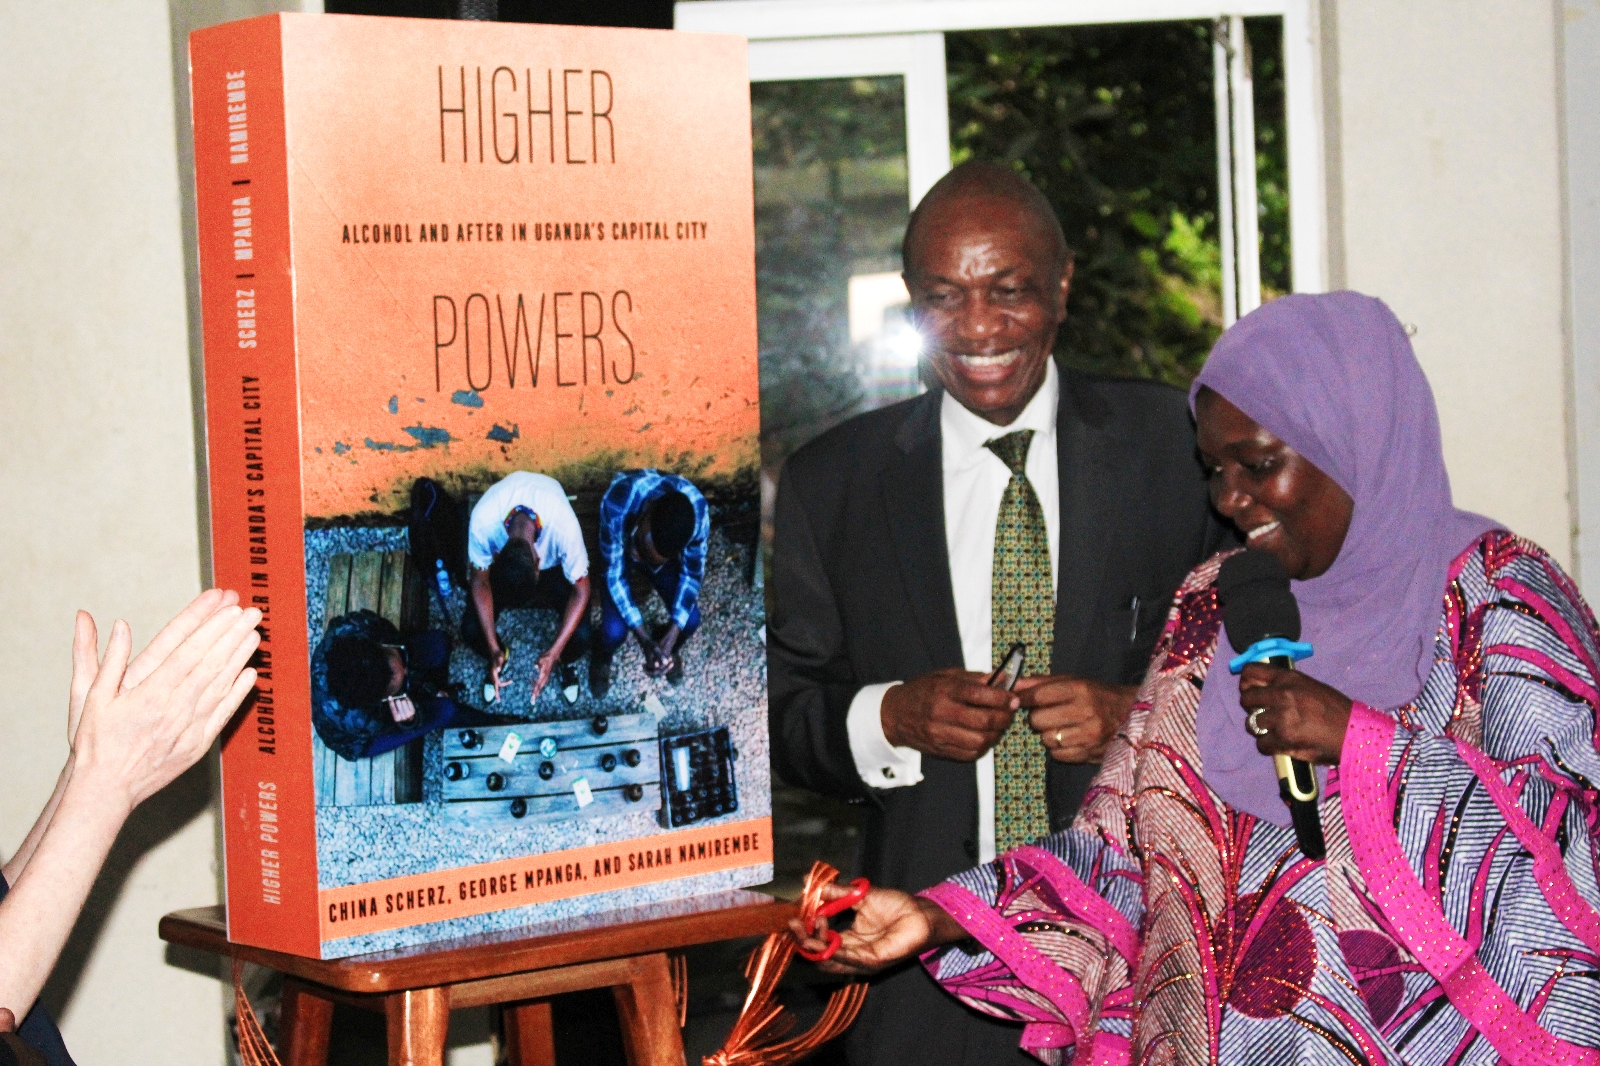 Dr. Hafsa Lukwata, the Assistant Commissioner for Health Mental Health and Center of Substance Abuse at the Ministry of Health, launches the book on behalf of the Permanent Secretary, Dr. Diana Atwine on 26th April 2024. Launch of Higher Powers: Alcohol and After in Uganda's capital city book by Sarah Namirembe, George Mpanga and UVA's Associate Professor China Scherz, 26th April 2024, Conference Hall, School of Food Technology, Nutrition and Bioengineering, CAES, Makerere University, Kampala Uganda, East Africa.